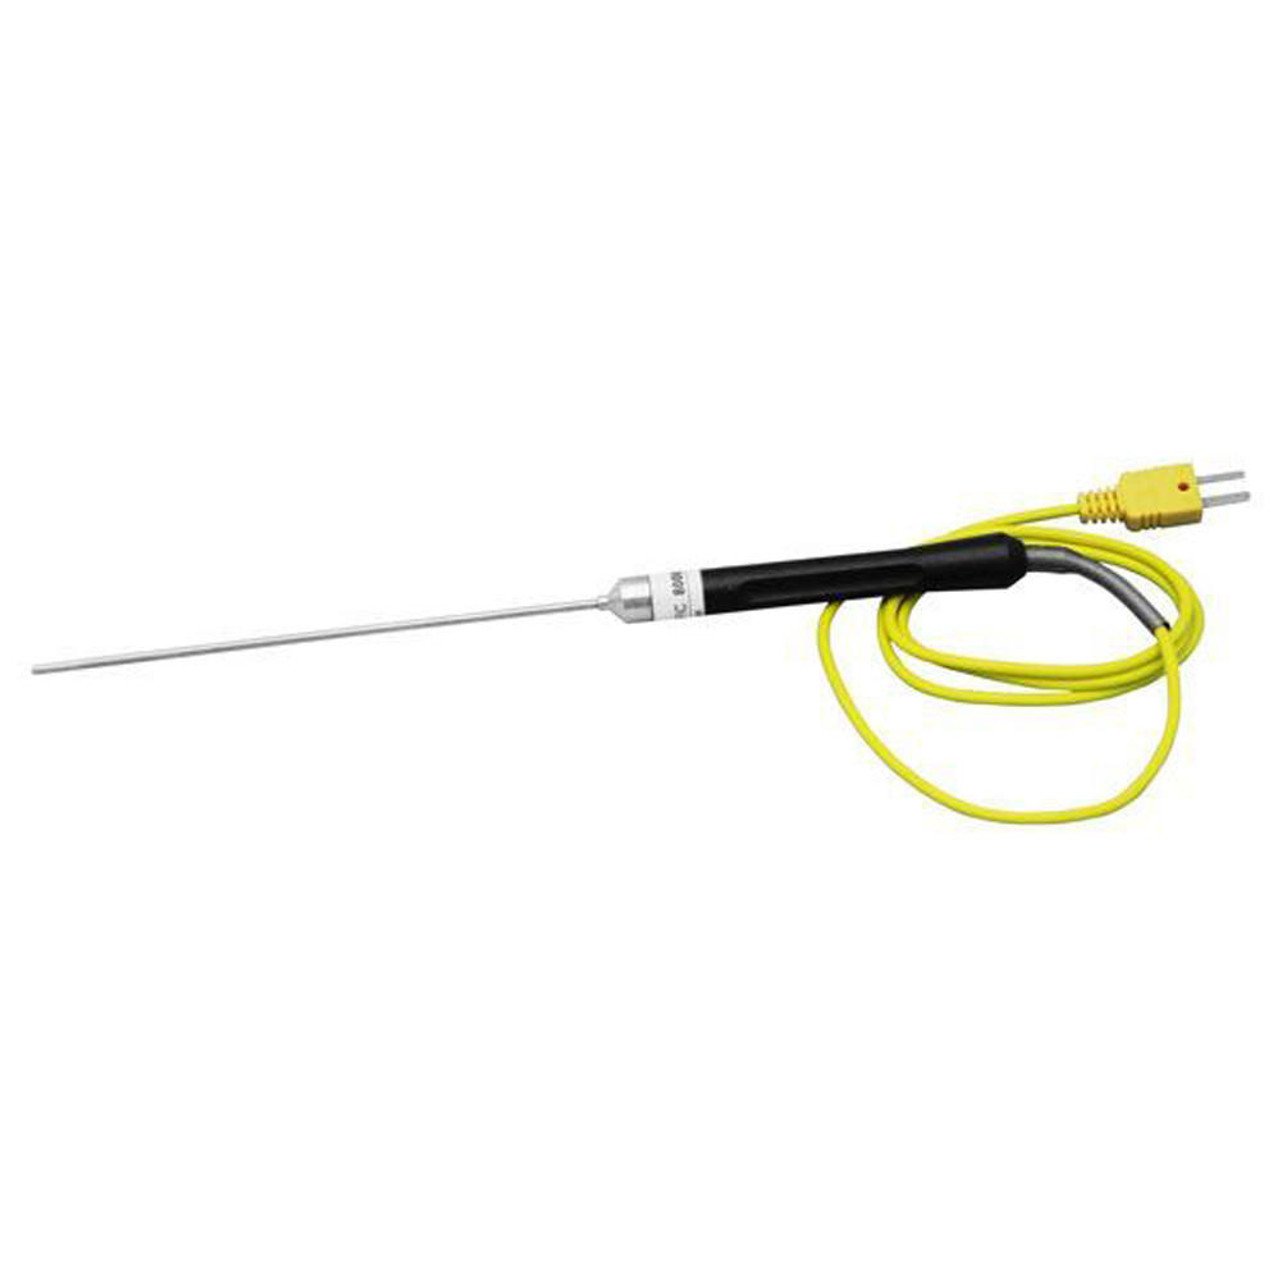 https://cdn11.bigcommerce.com/s-zgzol/images/stencil/1280x1280/products/8826/237385/gilson-company-type-k-thermocouple-probe-6in-58-to-752f-50-to-400c__15533.1698295572.jpg?c=2